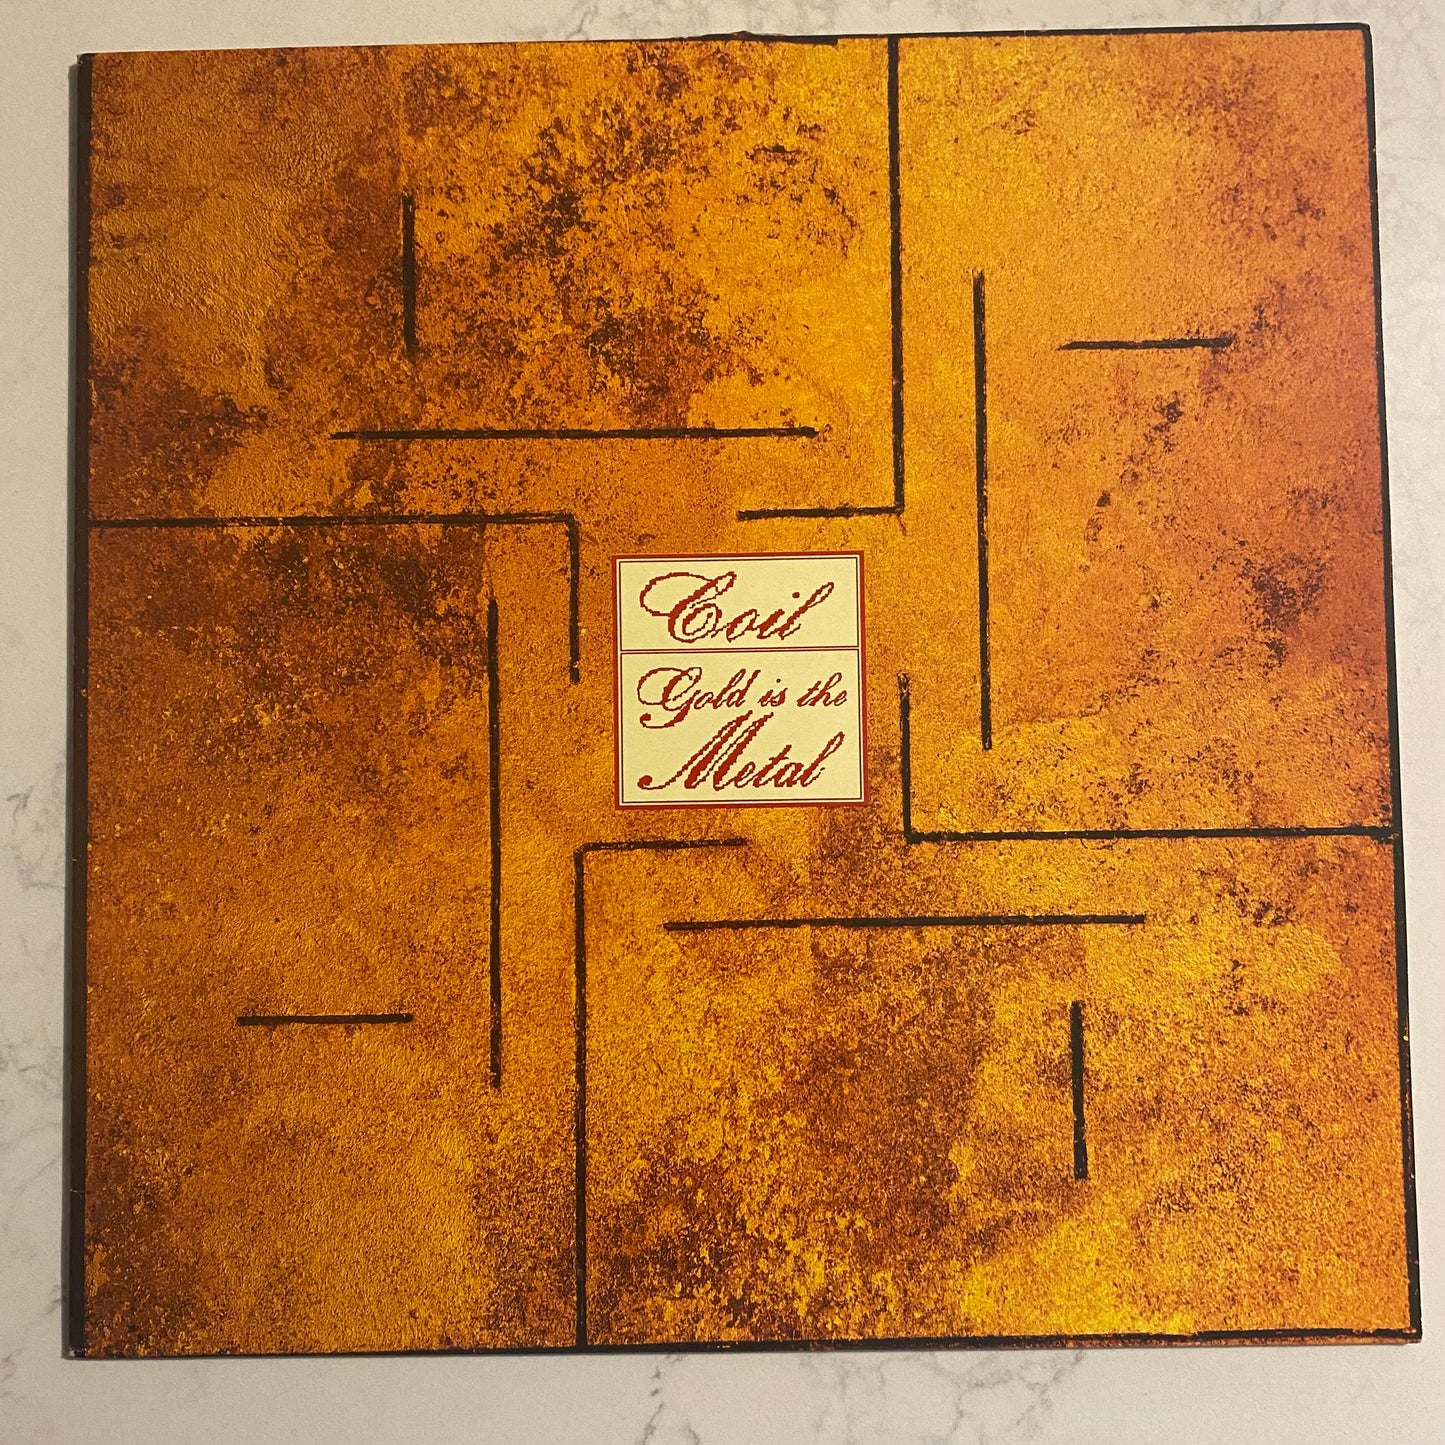 Coil - Gold Is The Metal (With The Broadest Shoulders) (LP)